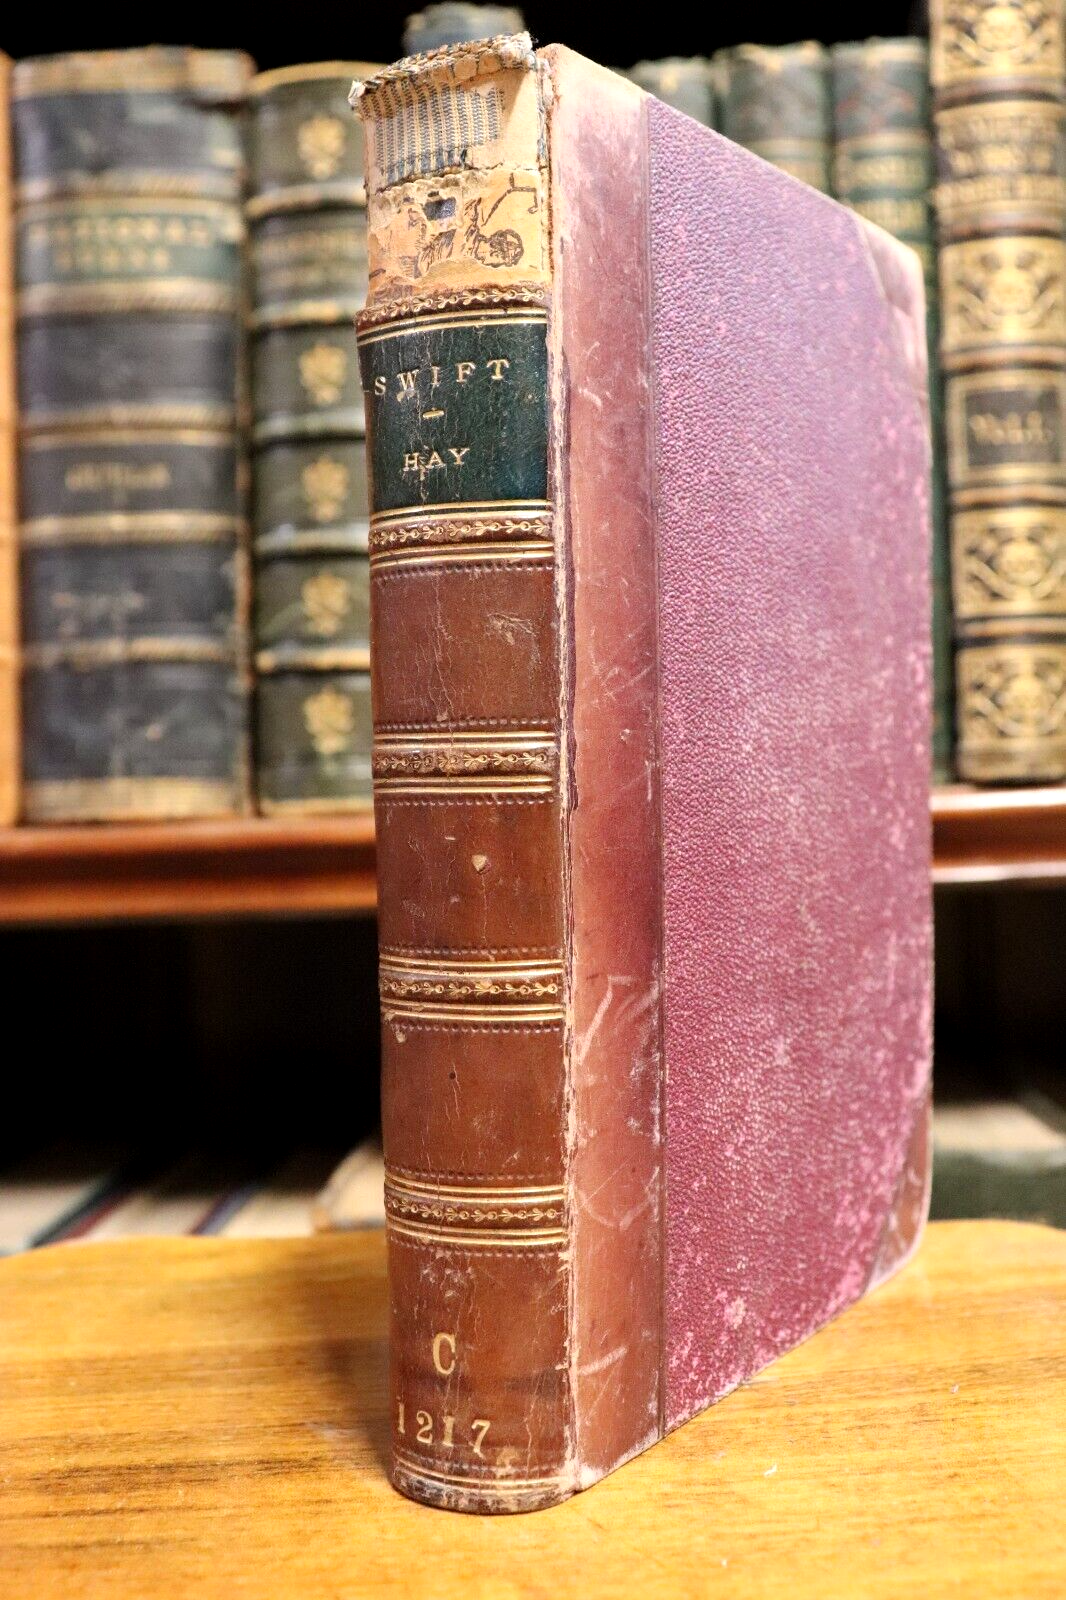 Swift: The Mystery Of His Life & Love - 1891 - 1st Ed. Literature History Book